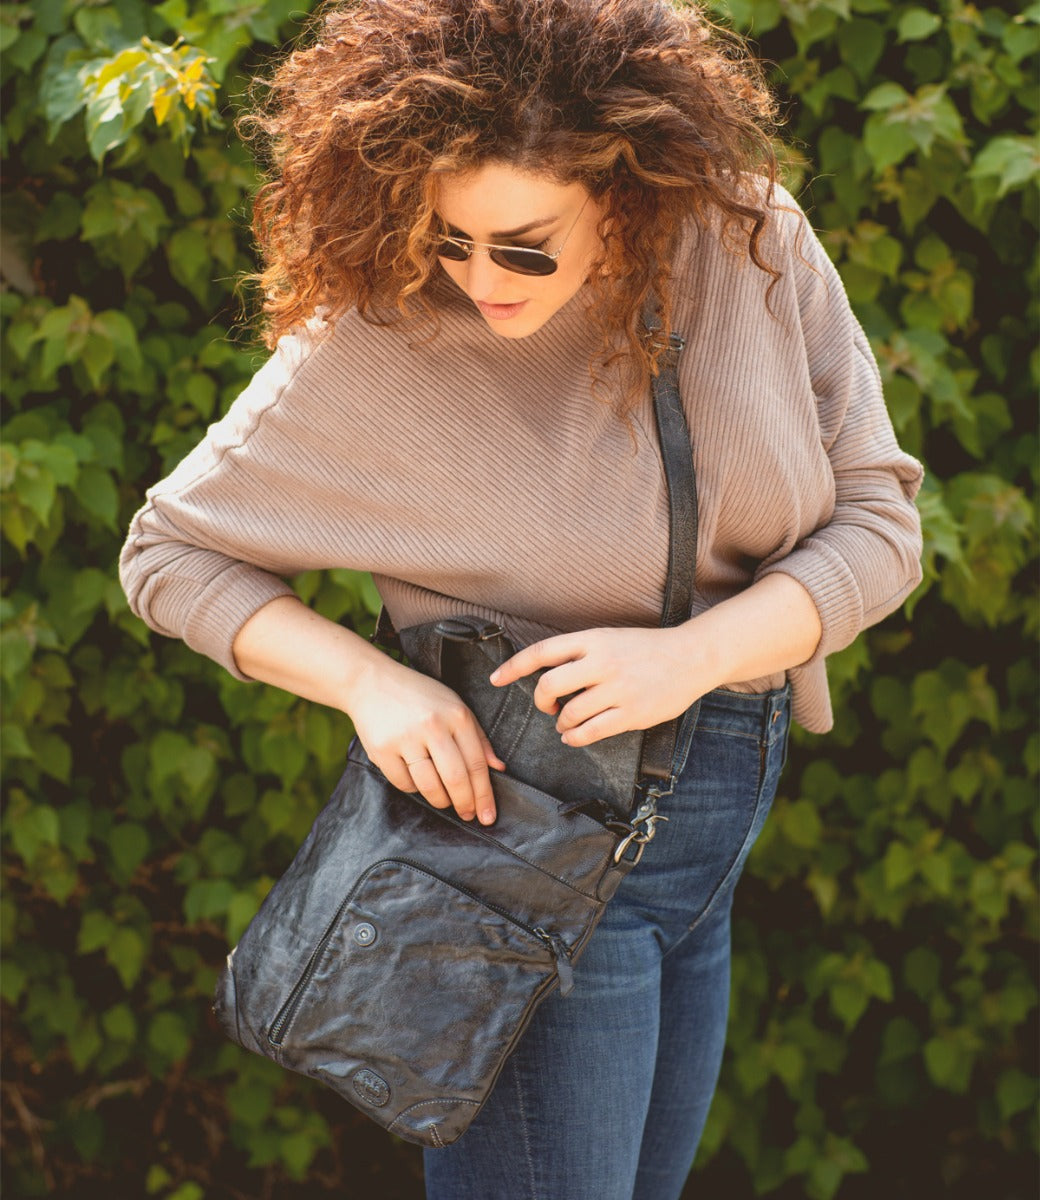 A woman with curly hair holding a Jack bag from Bed Stu.